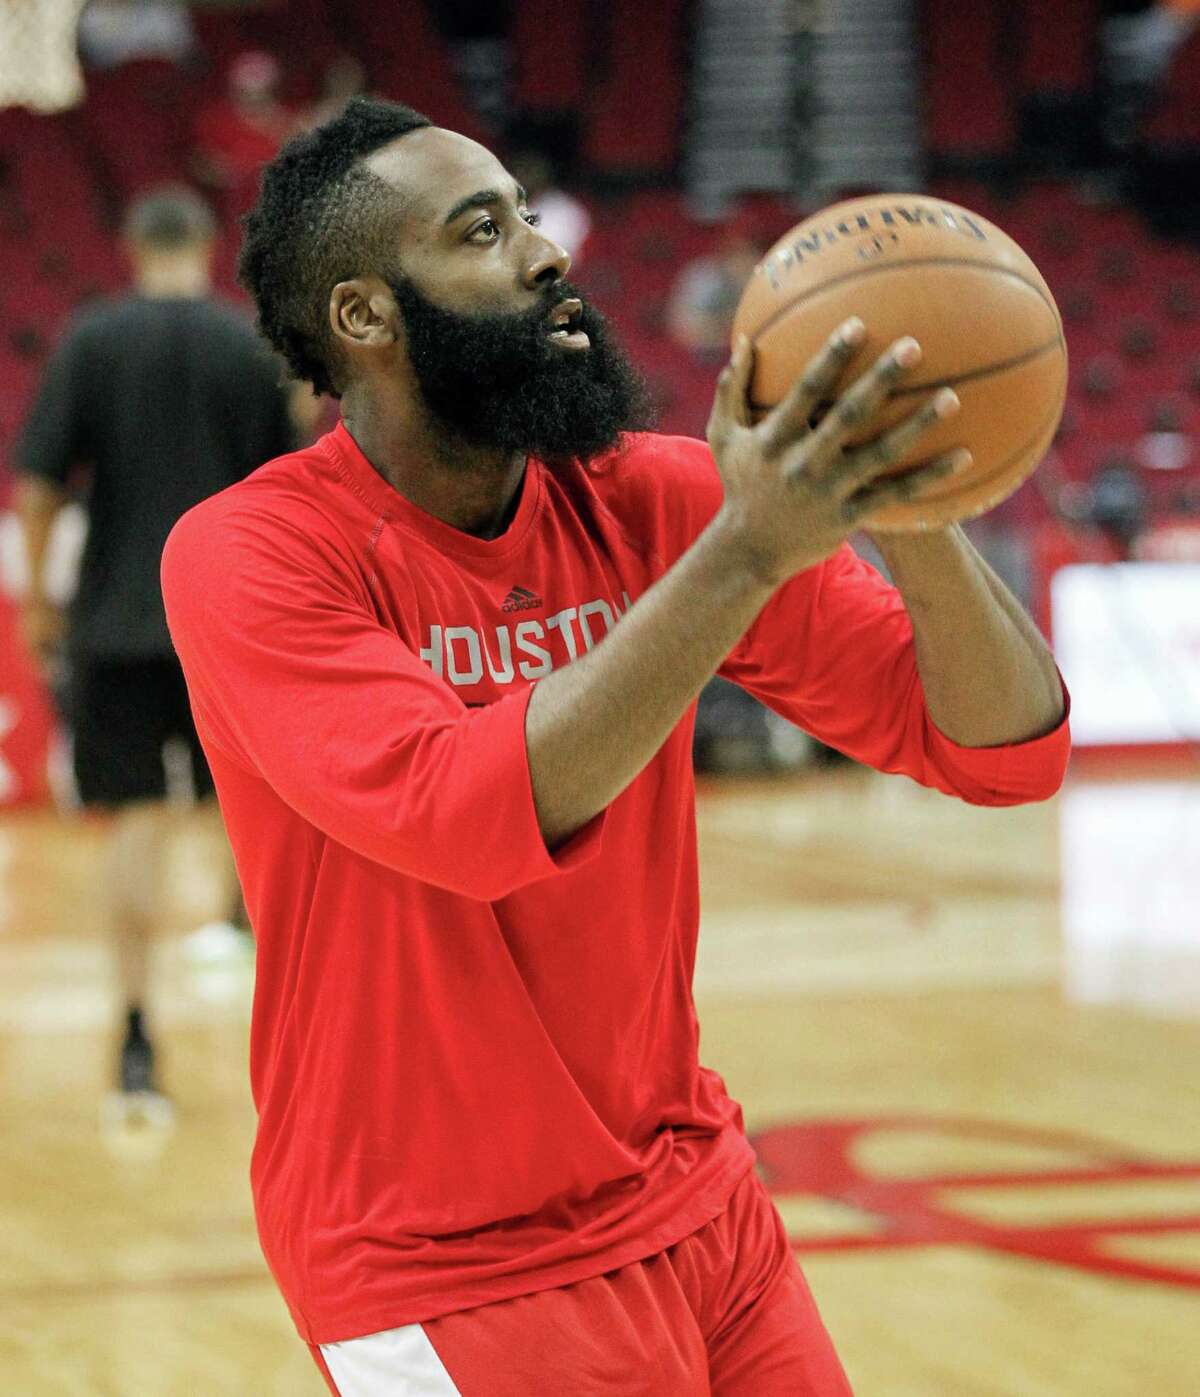 Houston Rockets' James Harden warms up before playing the San Antonio Spurs in an NBA basketball game Friday, April 10, 2015, in Houston.